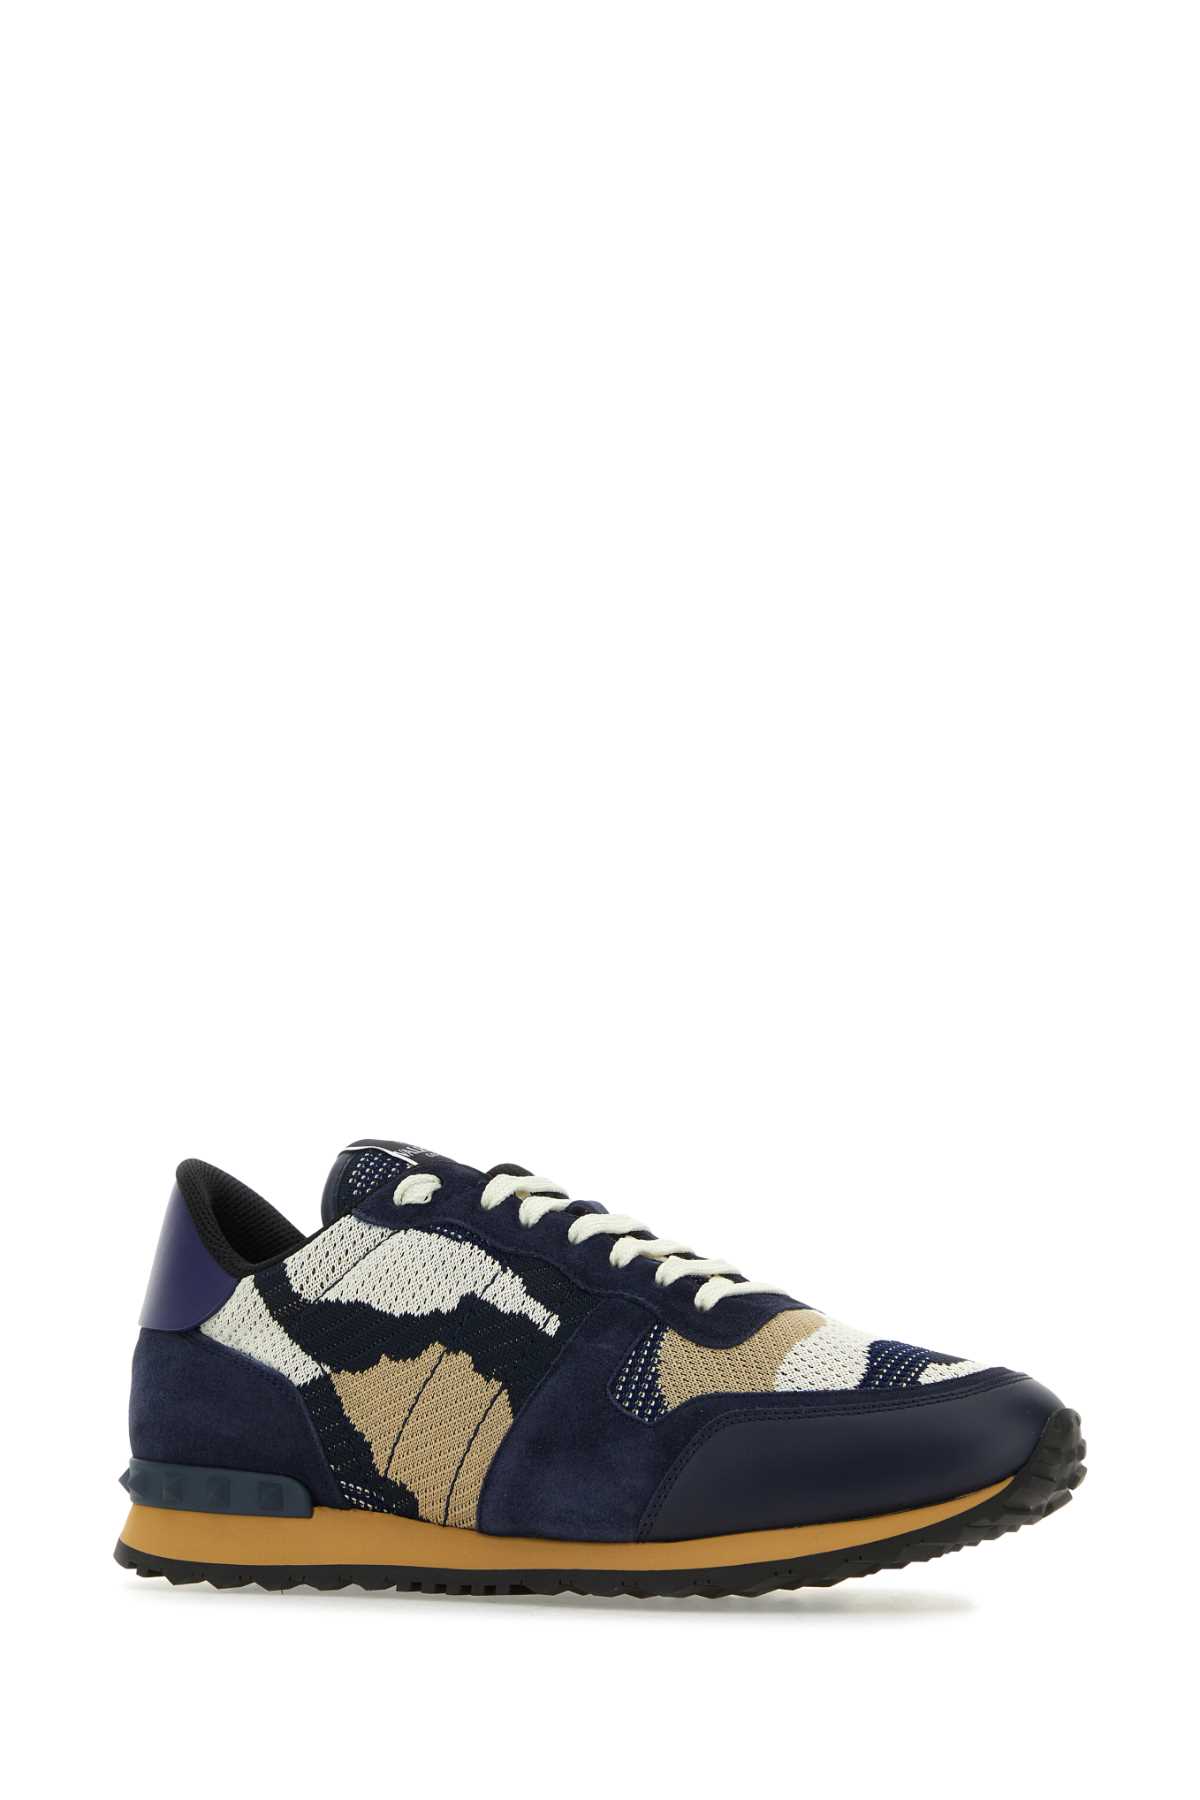 Shop Valentino Multicolor Fabric And Leather Rockrunner Camouflage Sneakers In Marinebrindigoivdbeigemamabibe